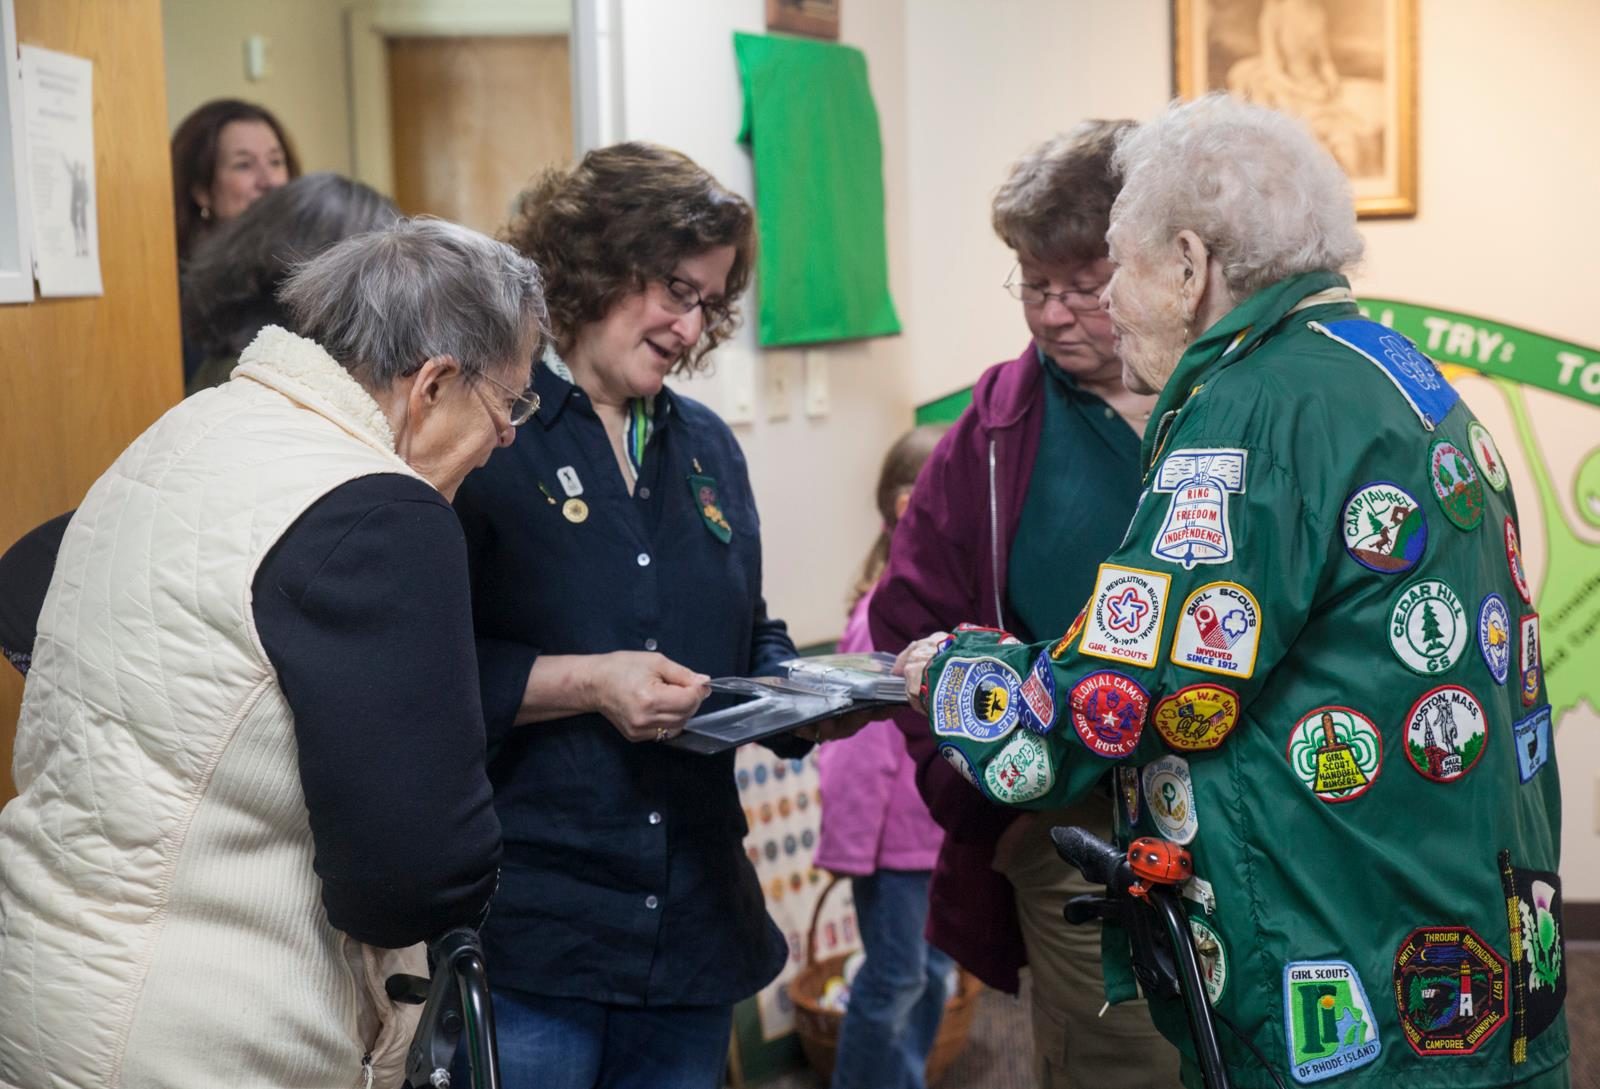 Discover Connecticut Girl Scout History